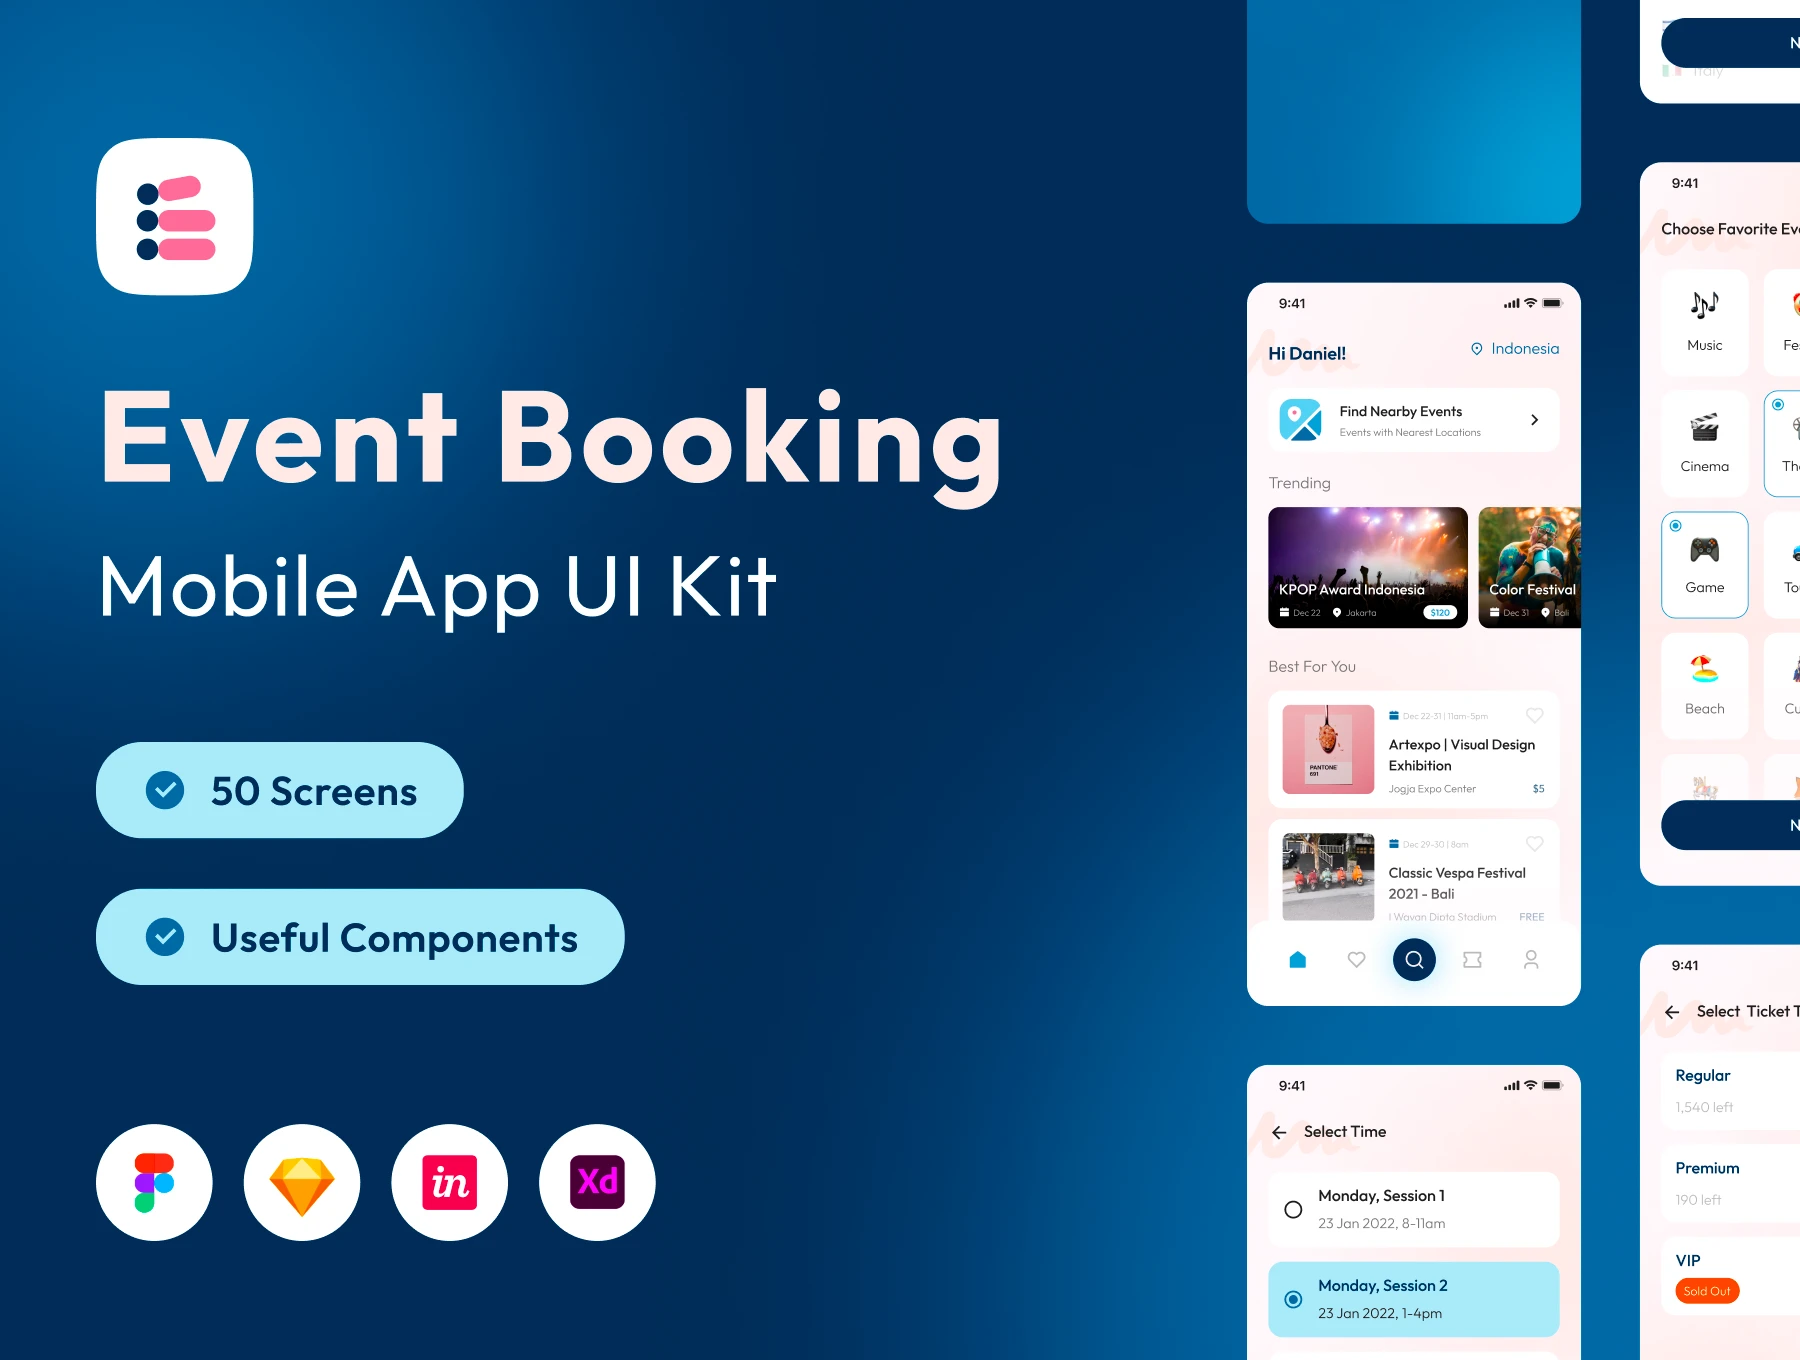 [VIP] Evento: Event Booking Apps UI KIT